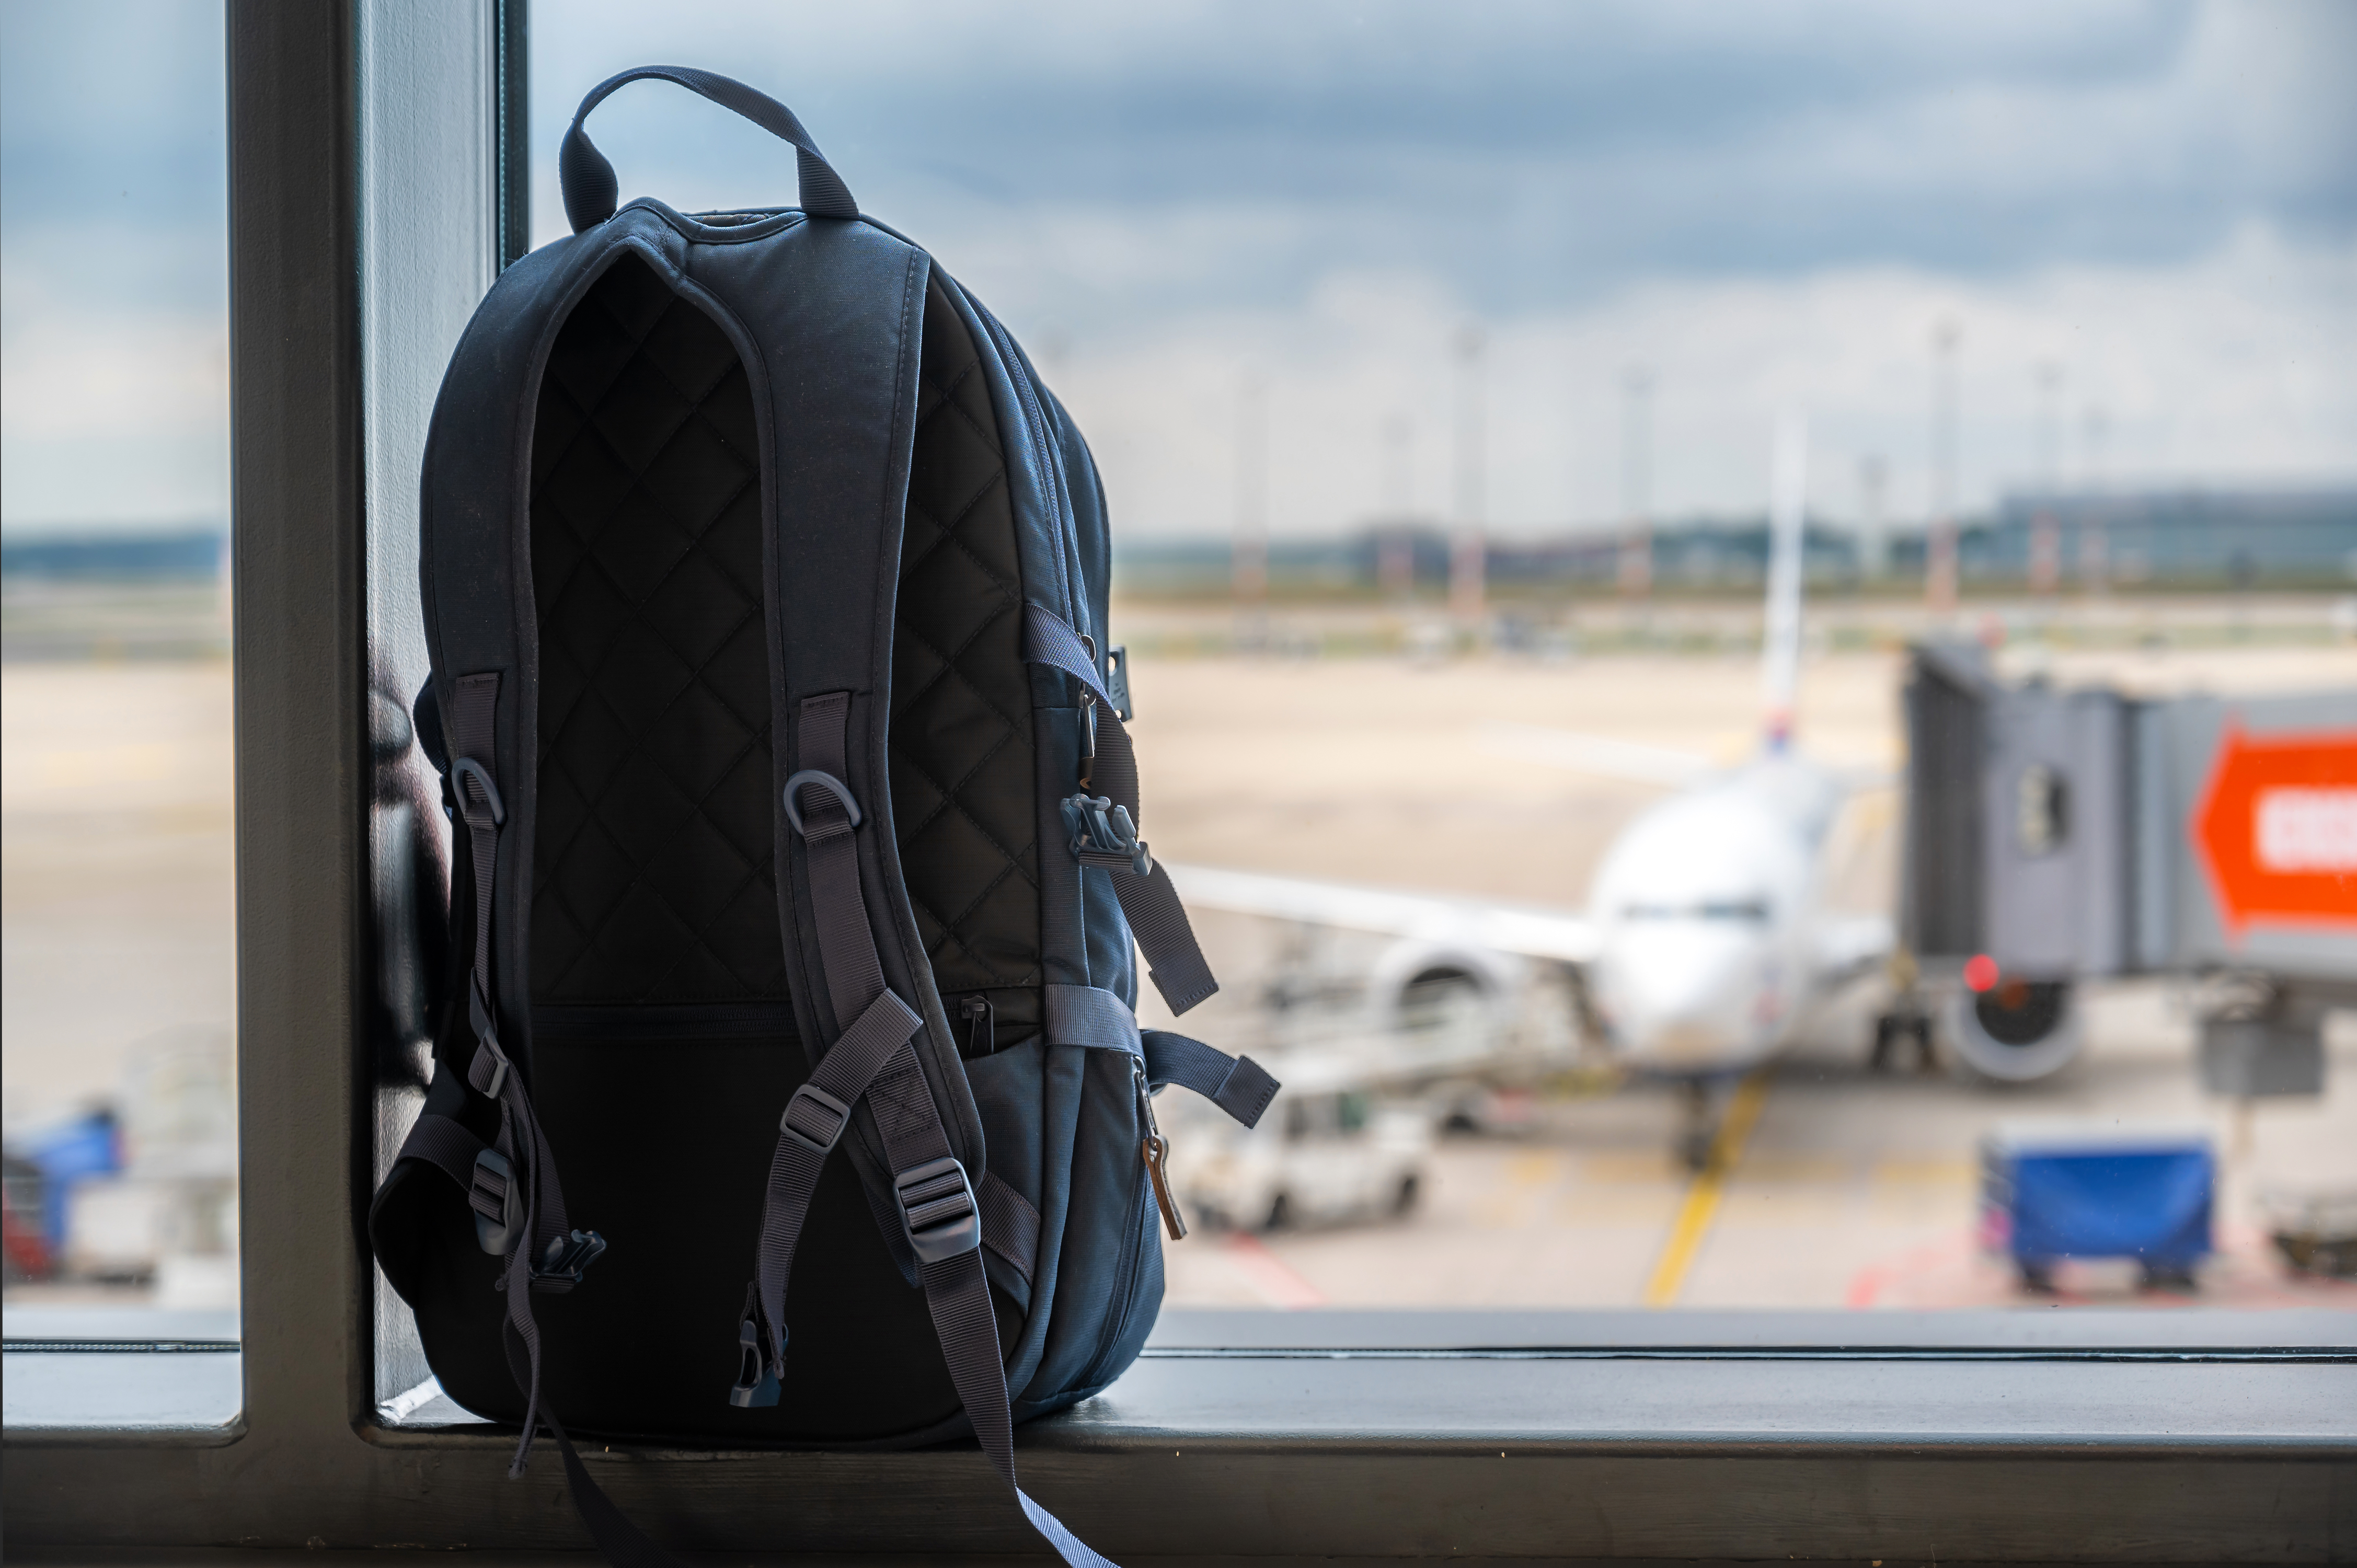 Backpacks becoming a more popular type of luggage on flights